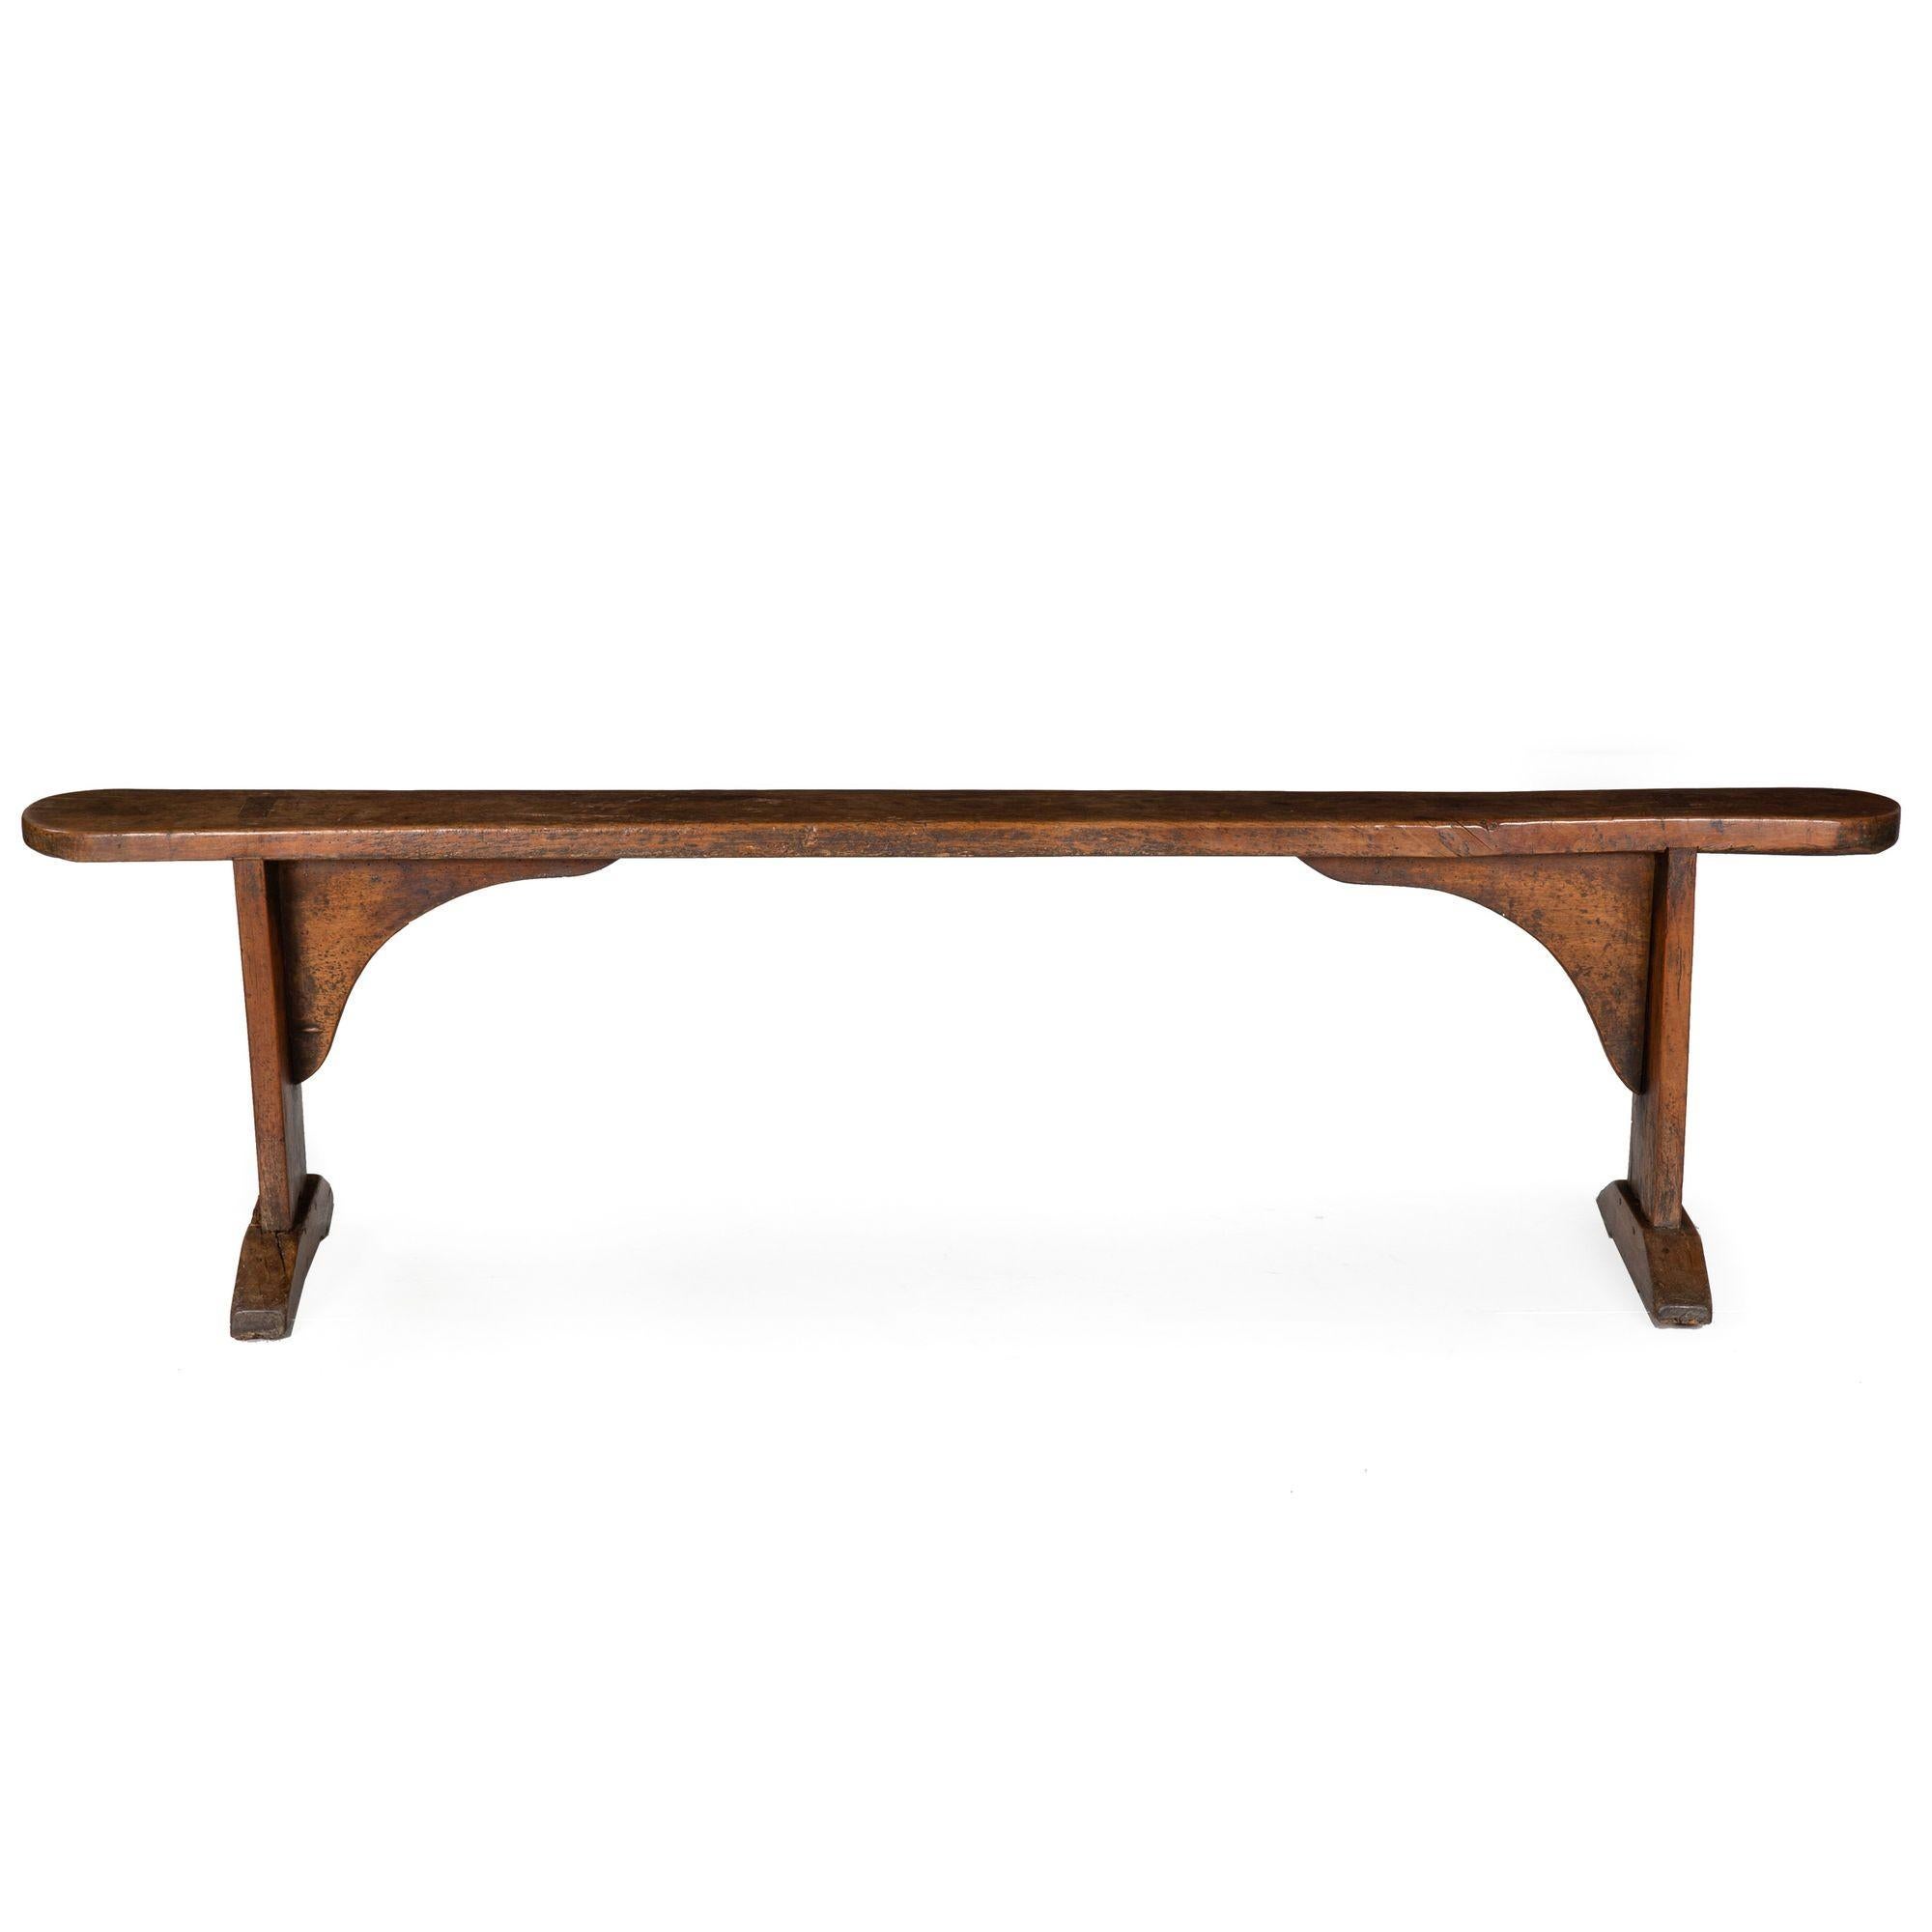 ENGLISH PATINATED ELM LONG TRESTLE BENCH
Two available  Circa 1750 with restorations
Item # 305TBP10L-2

An incredibly beautiful bench, we acquired this as part of a pair (the other possibly still available in our inventory under item # 305TBP10L-1)